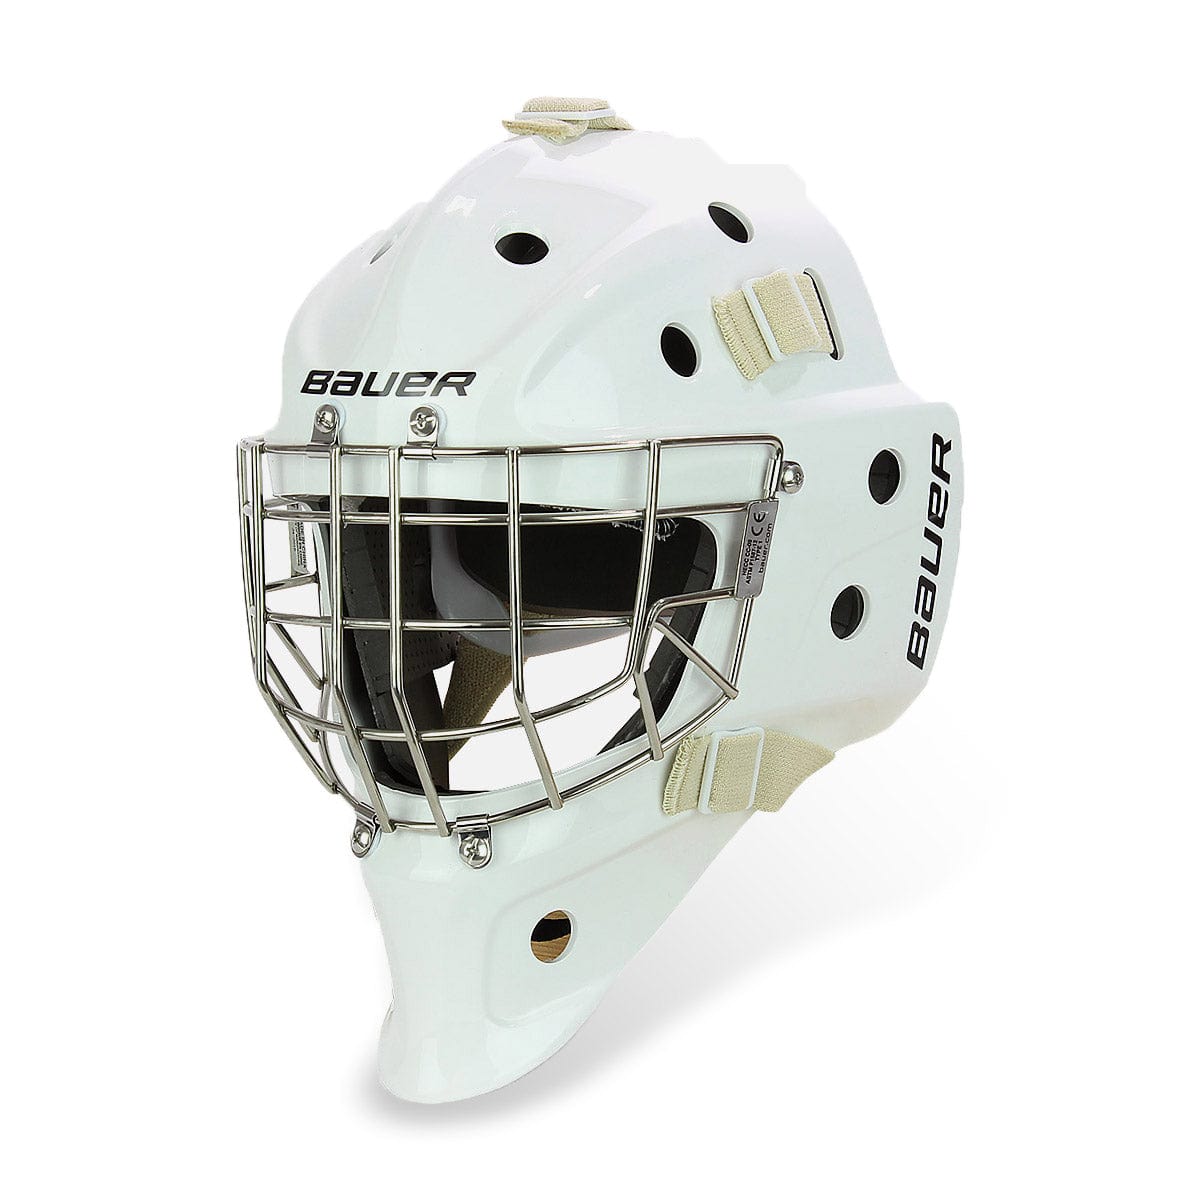 Bauer Profile 940X Junior Goalie Mask - White - The Hockey Shop Source For Sports